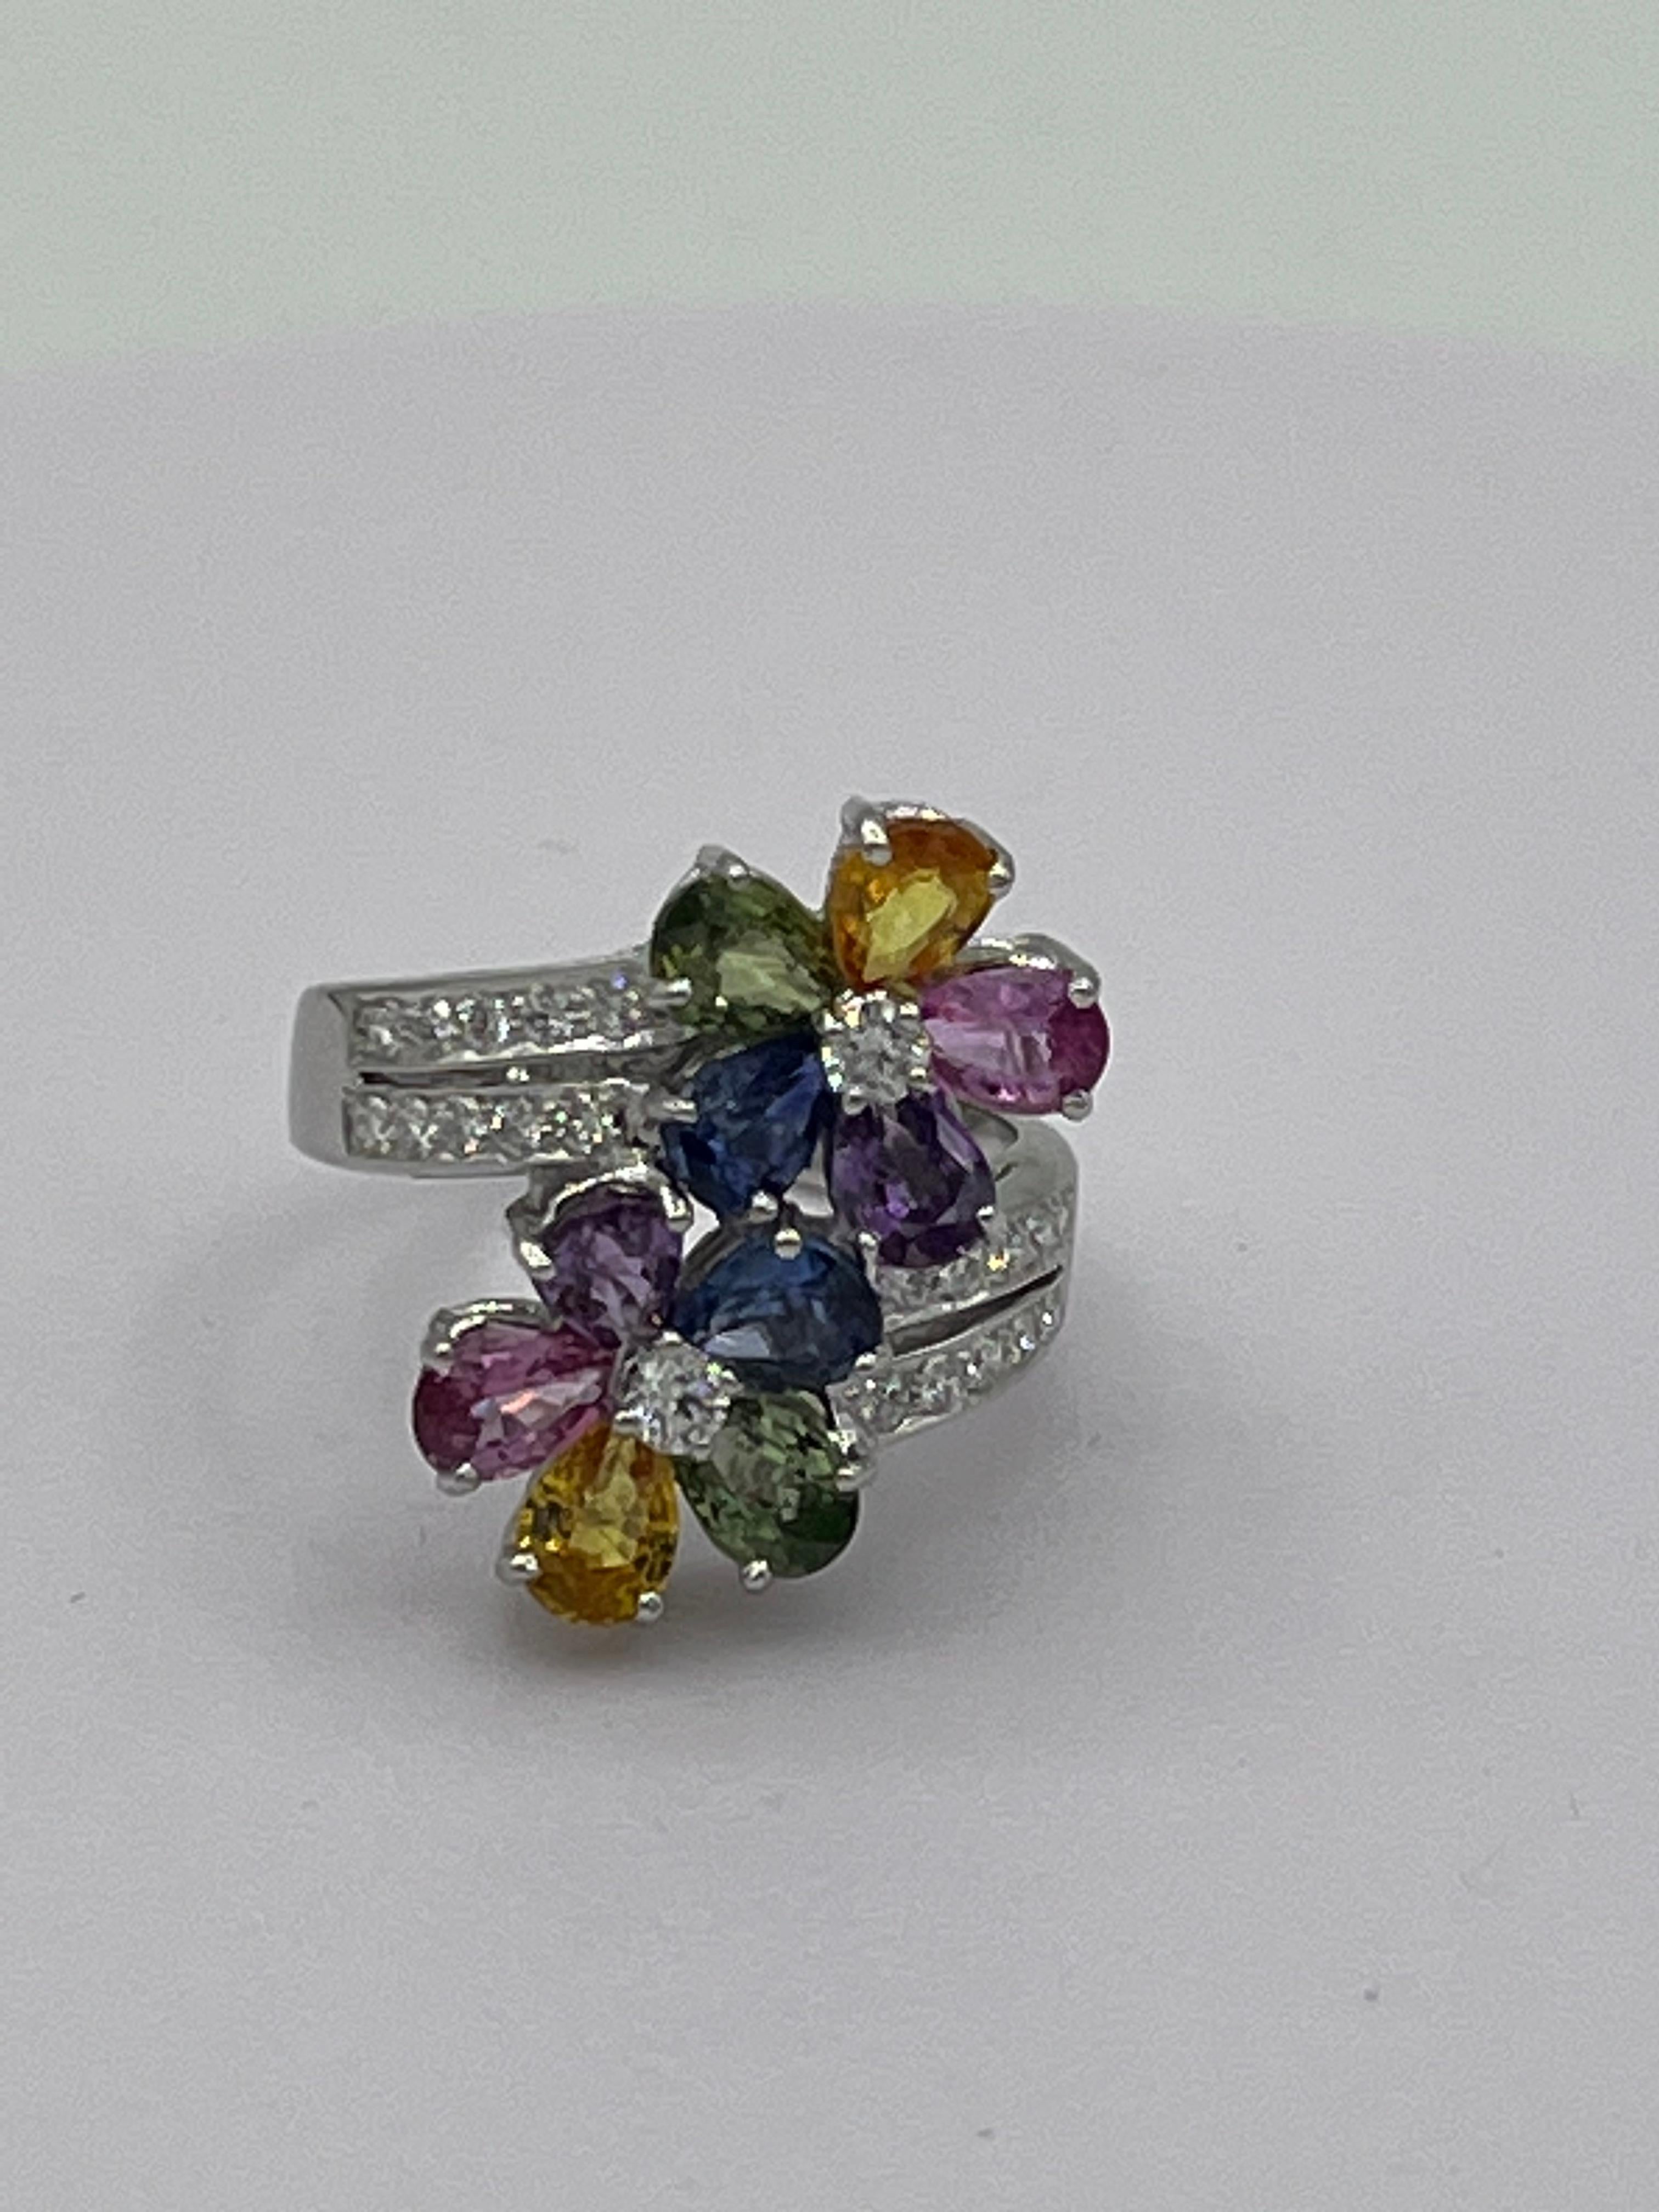 18 k white gold
4,75 ct multicolor sapphire
0,44. ct. diamonds
8,6 gram
size 55

This ring is a beautiful flower ring with pink, yellow, purple, green and blue sapphire,
in each flower in the middle one diamond, on the ring rail are double diamonds